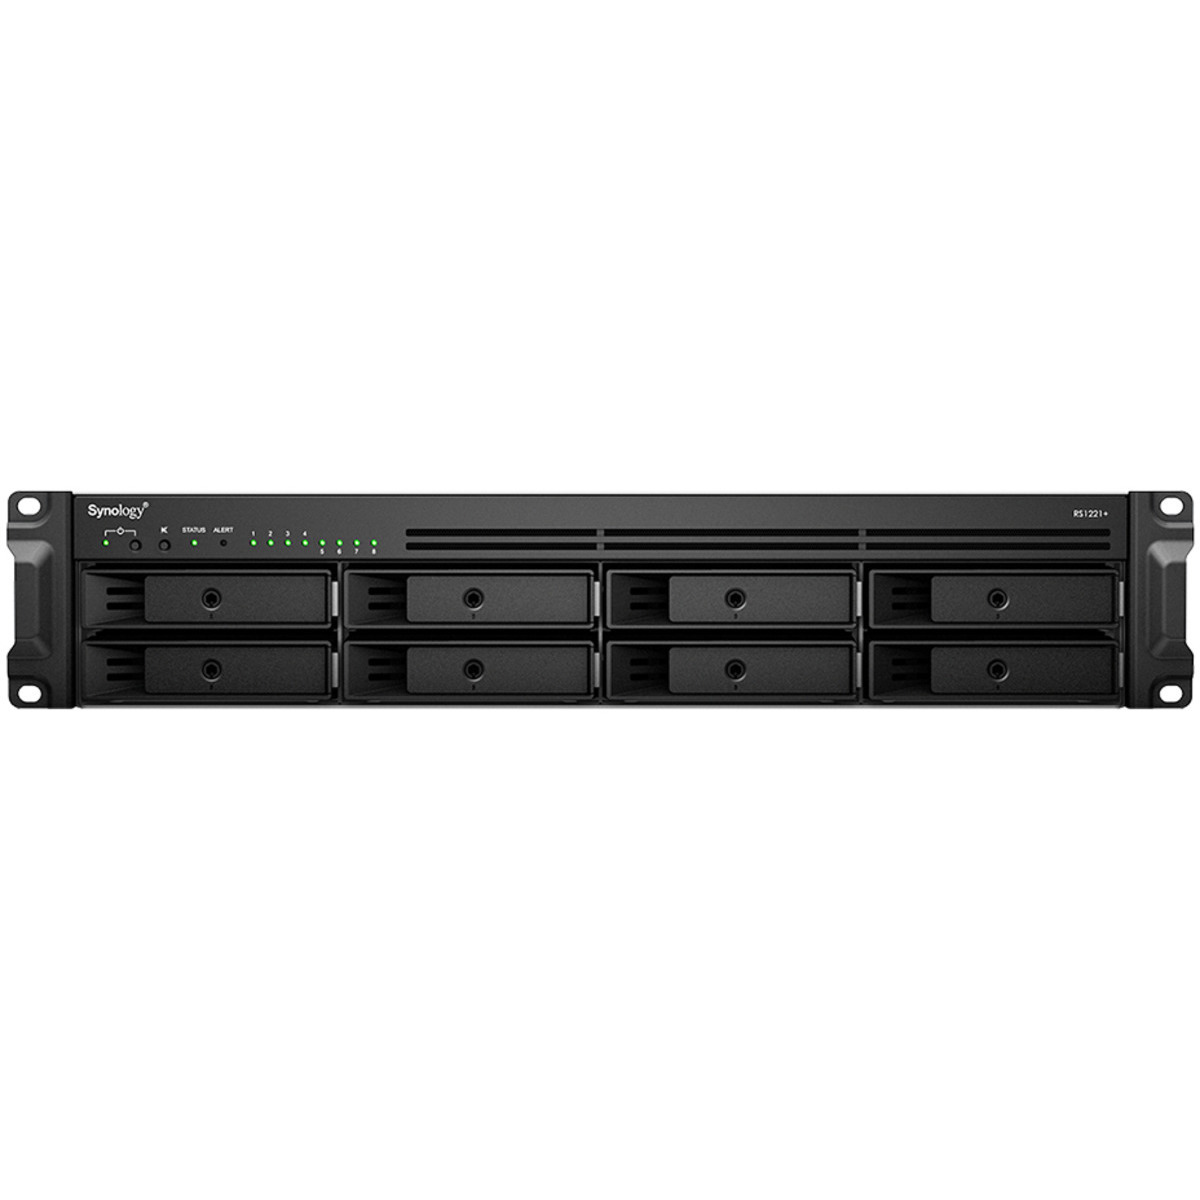 Synology RackStation RS1221+ 48tb 8-Bay RackMount Multimedia / Power User / Business NAS - Network Attached Storage Device 4x12tb Toshiba Enterprise Capacity MG07ACA12TE 3.5 7200rpm SATA 6Gb/s HDD ENTERPRISE Class Drives Installed - Burn-In Tested RackStation RS1221+